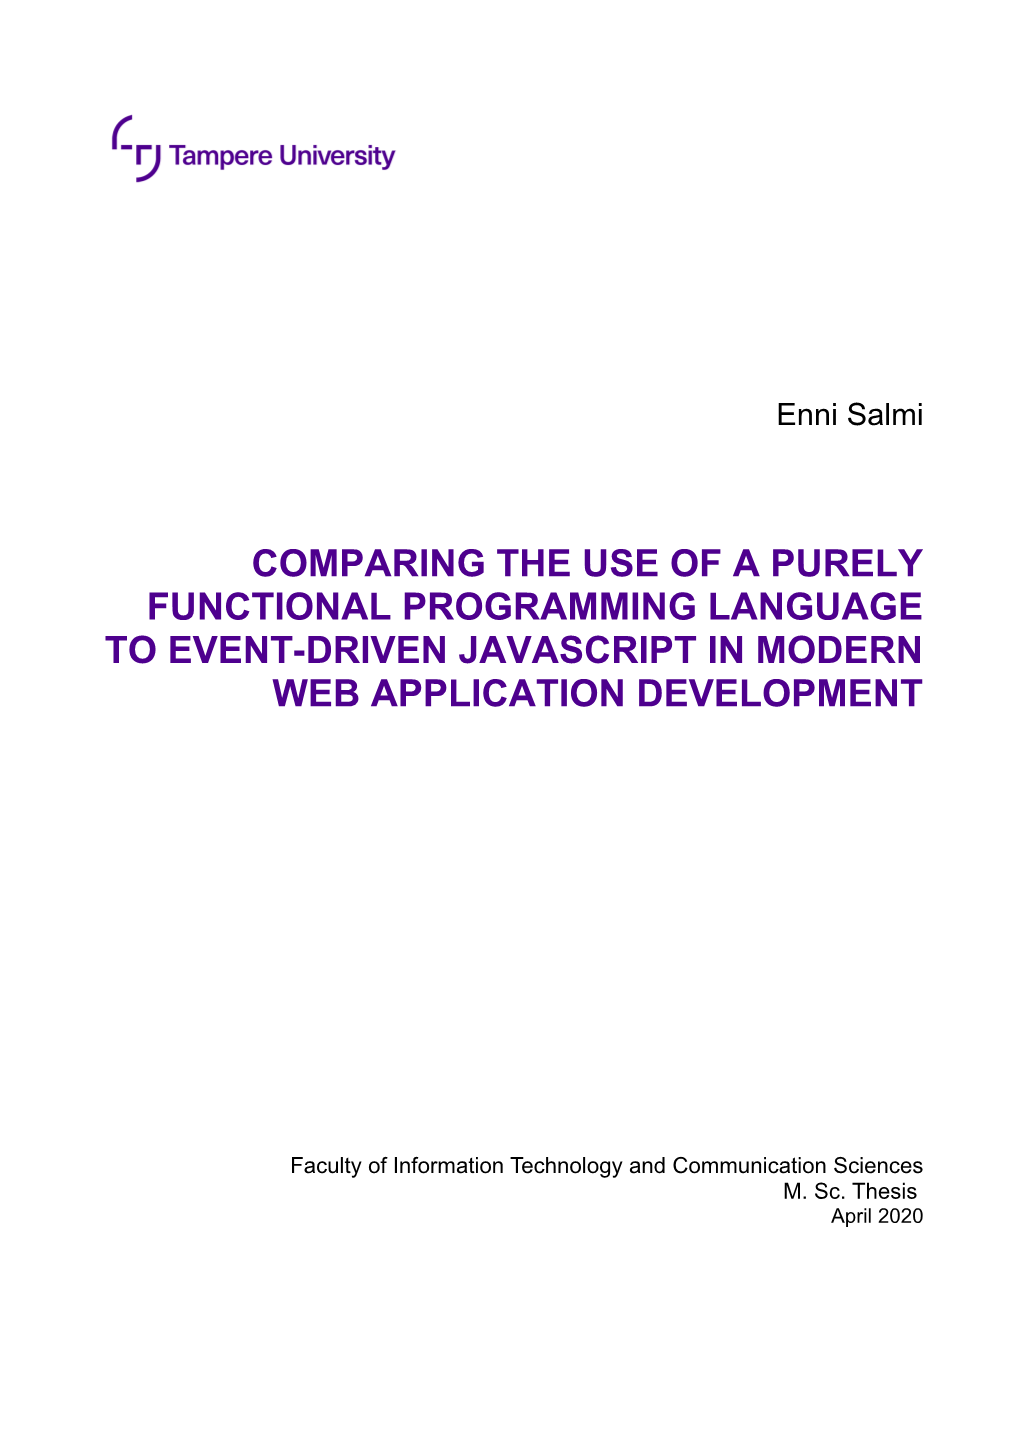 Comparing the Use of a Purely Functional Programming Language to Event-Driven Javascript in Modern Web Application Development